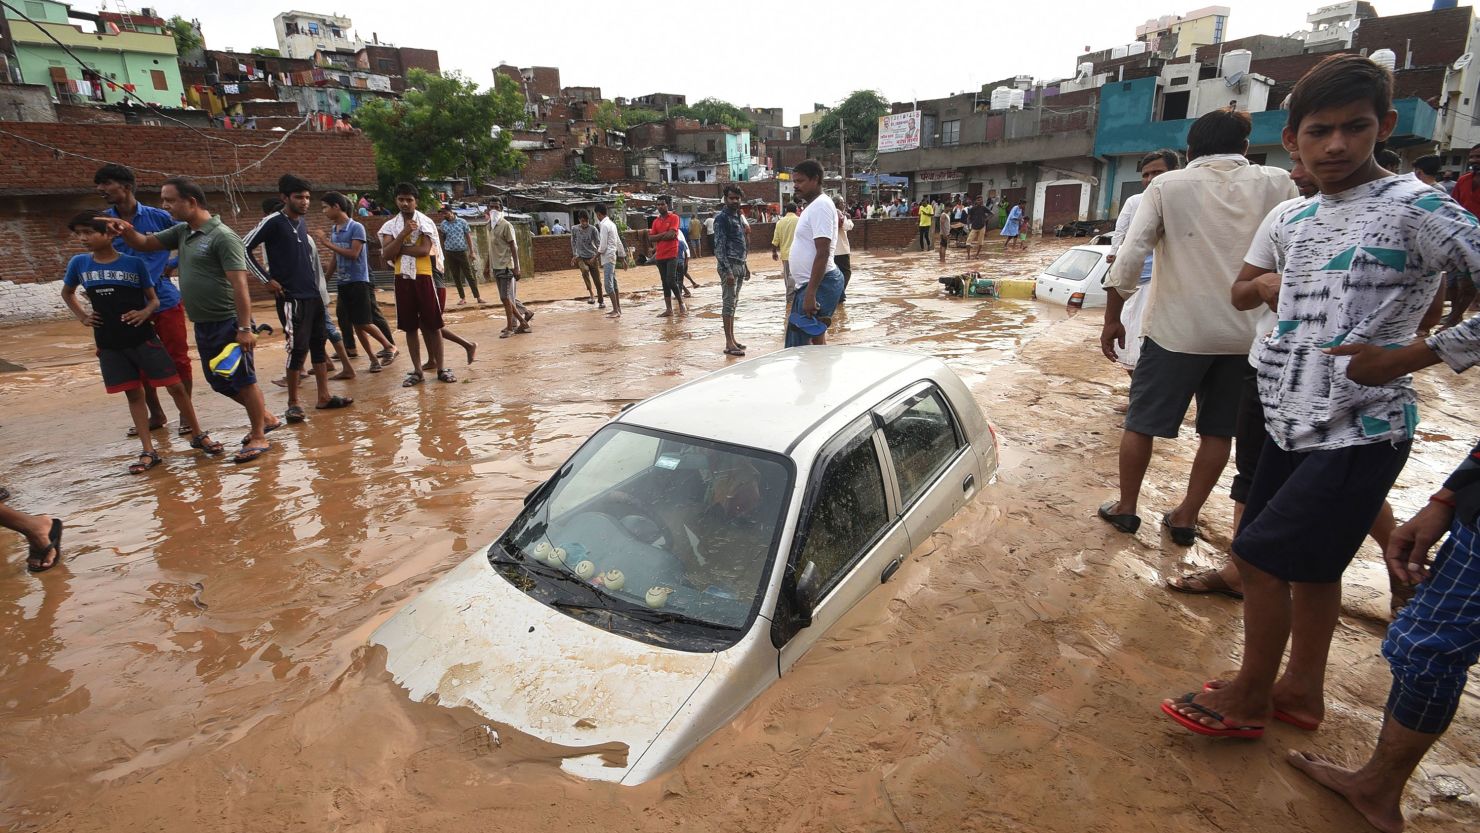 Heavy monsoon rainfall in Jaipur in August left this car caked in mud.